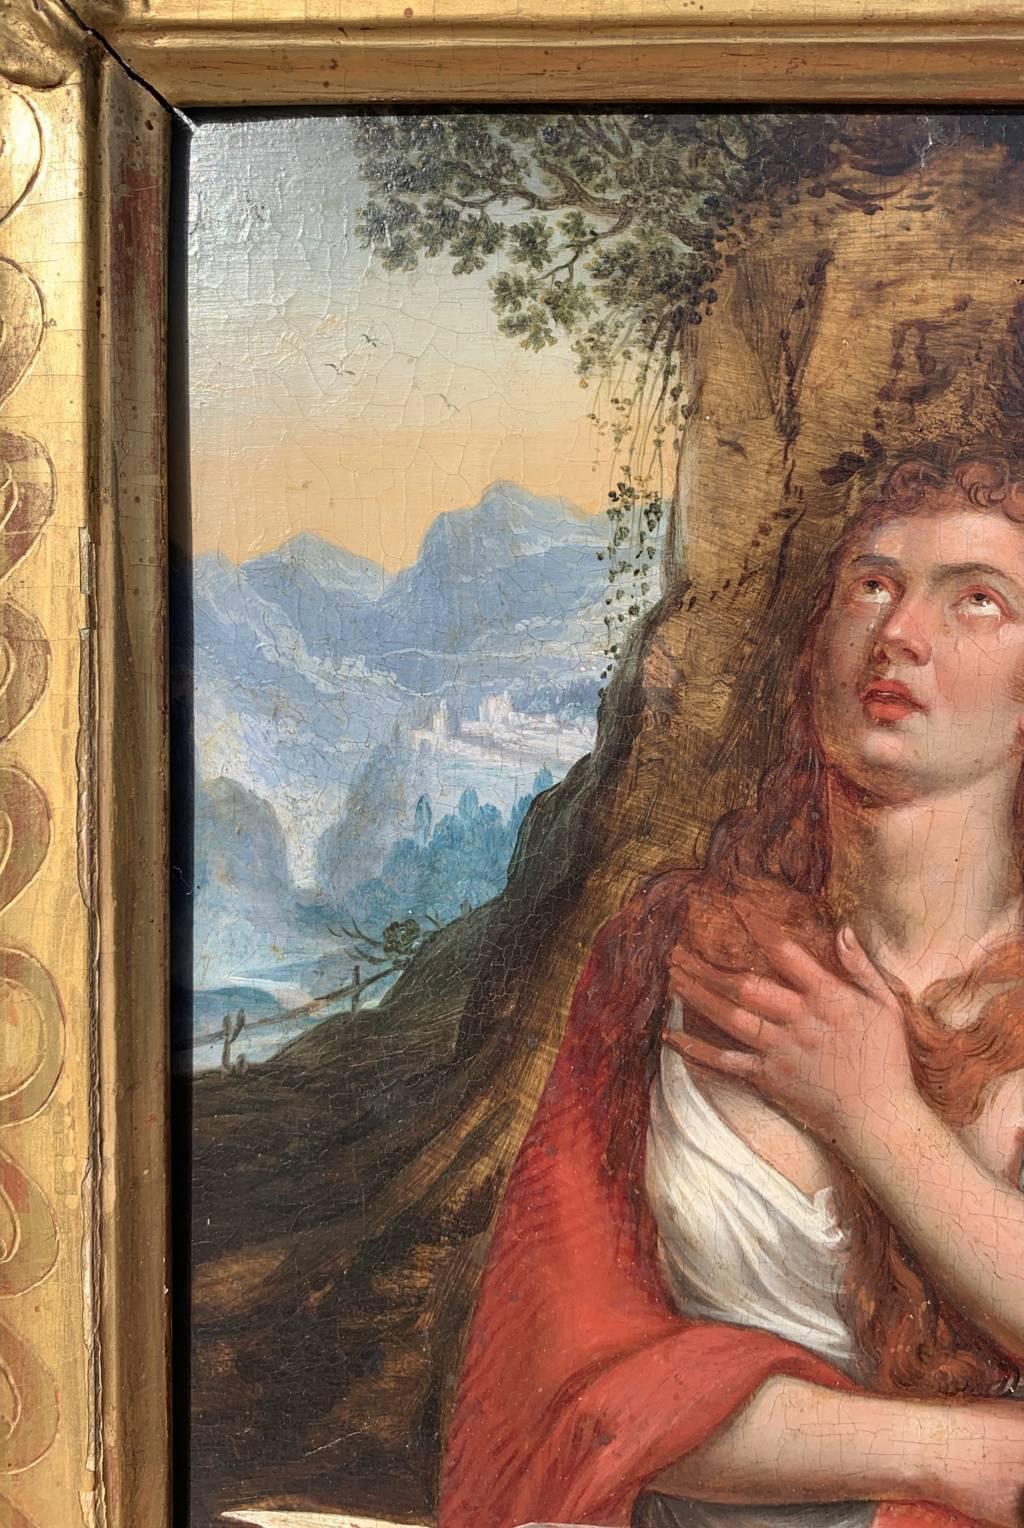 Follower of Tiziano Vecellio (18th century) - Penitent Magdalene.

35.5 x 25 cm without frame, 48.5 x 38.5 cm with frame.

Antique oil painting on wood, in a carved and gilded wooden frame.

- The work takes up the painting by Tiziano Vecellio